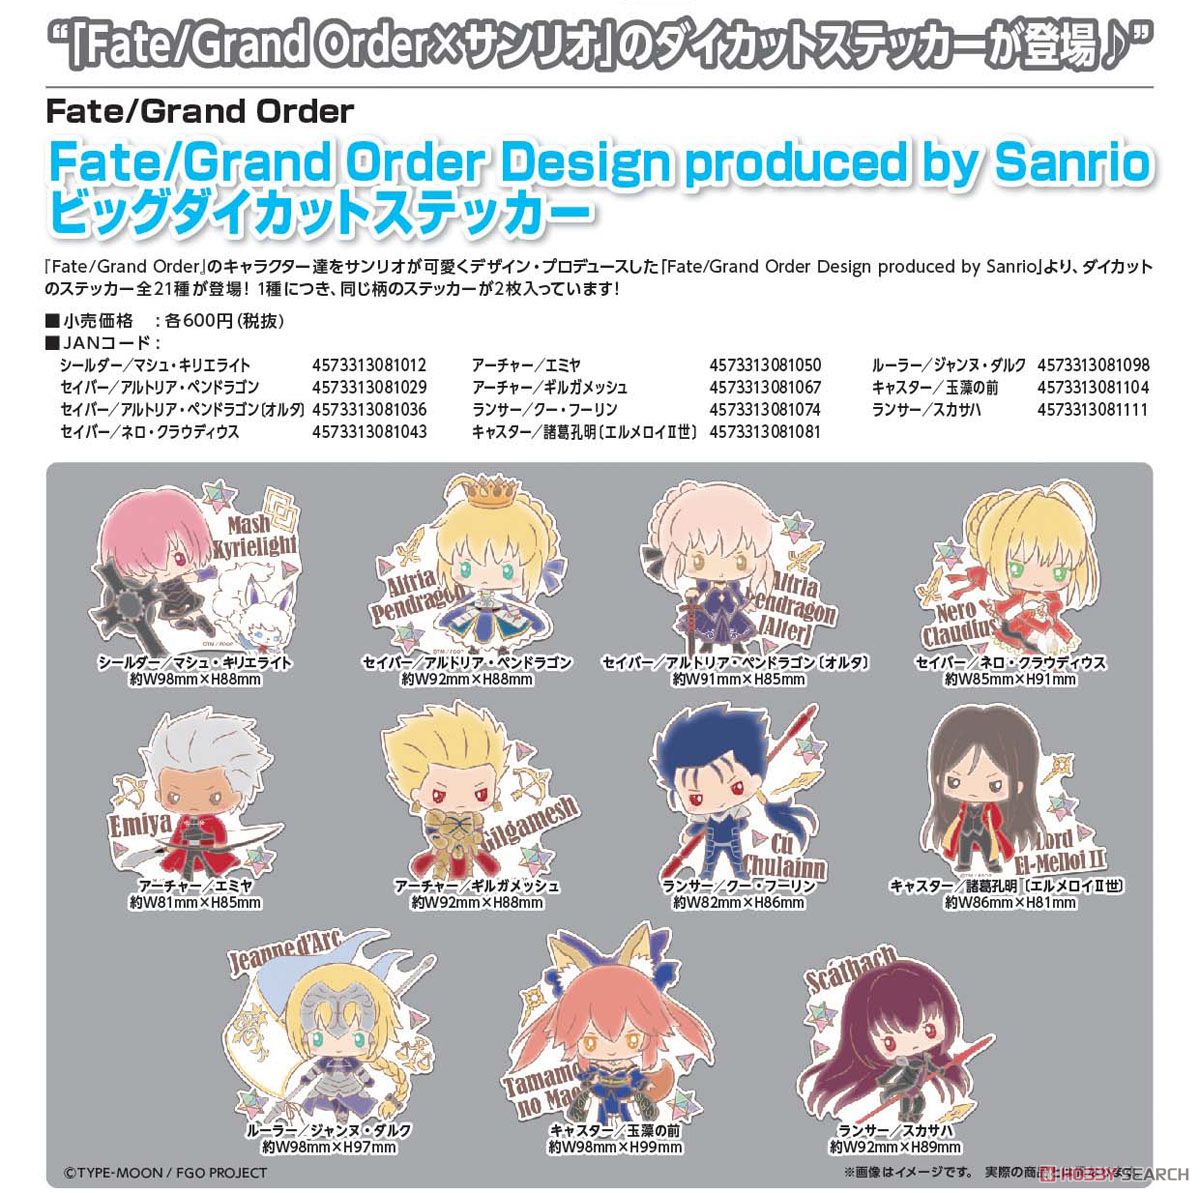 Fate/Grand Order Design produced by Sanrio ビッグダイカットステッカー アヴェンジャー/巌窟王 エドモン・ダンテス (キャラクターグッズ) その他の画像1